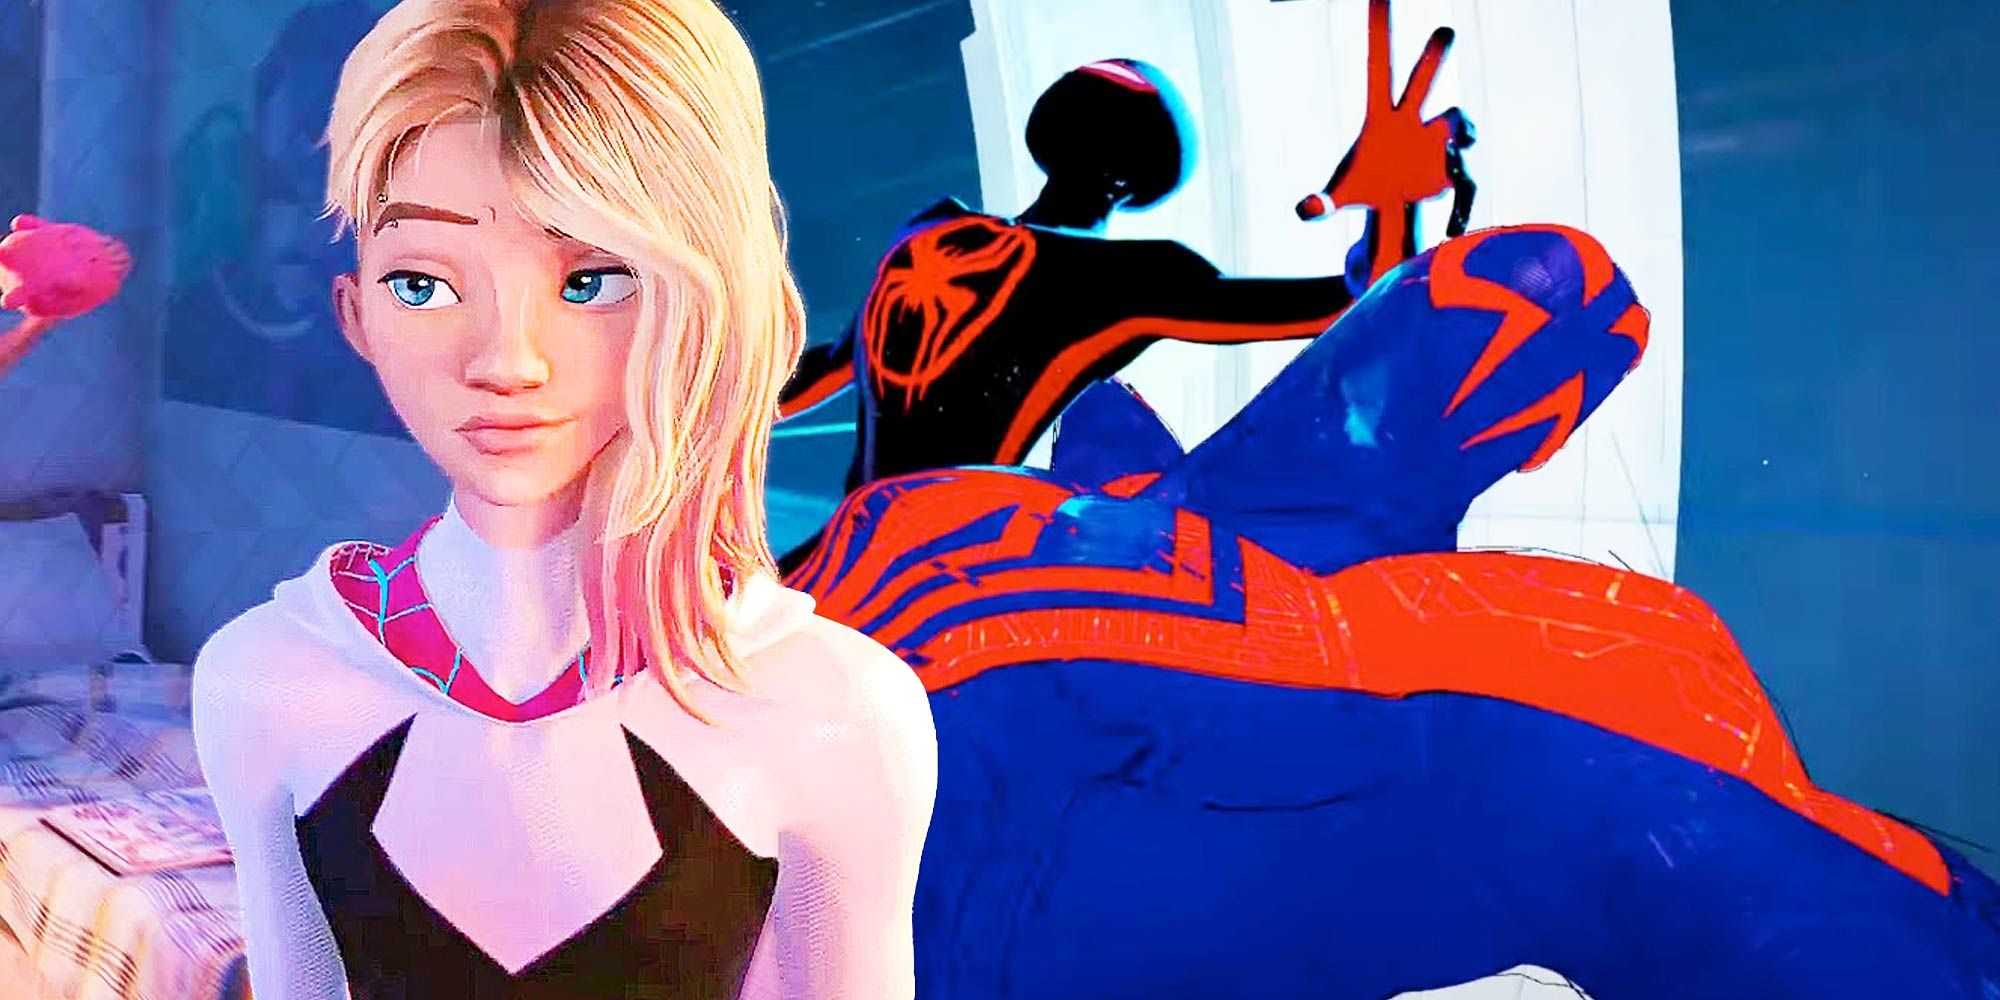 Spider-Man: Across the Spider-Verse': The First 15 Minutes Reveal Shocking  New Details About the Characters